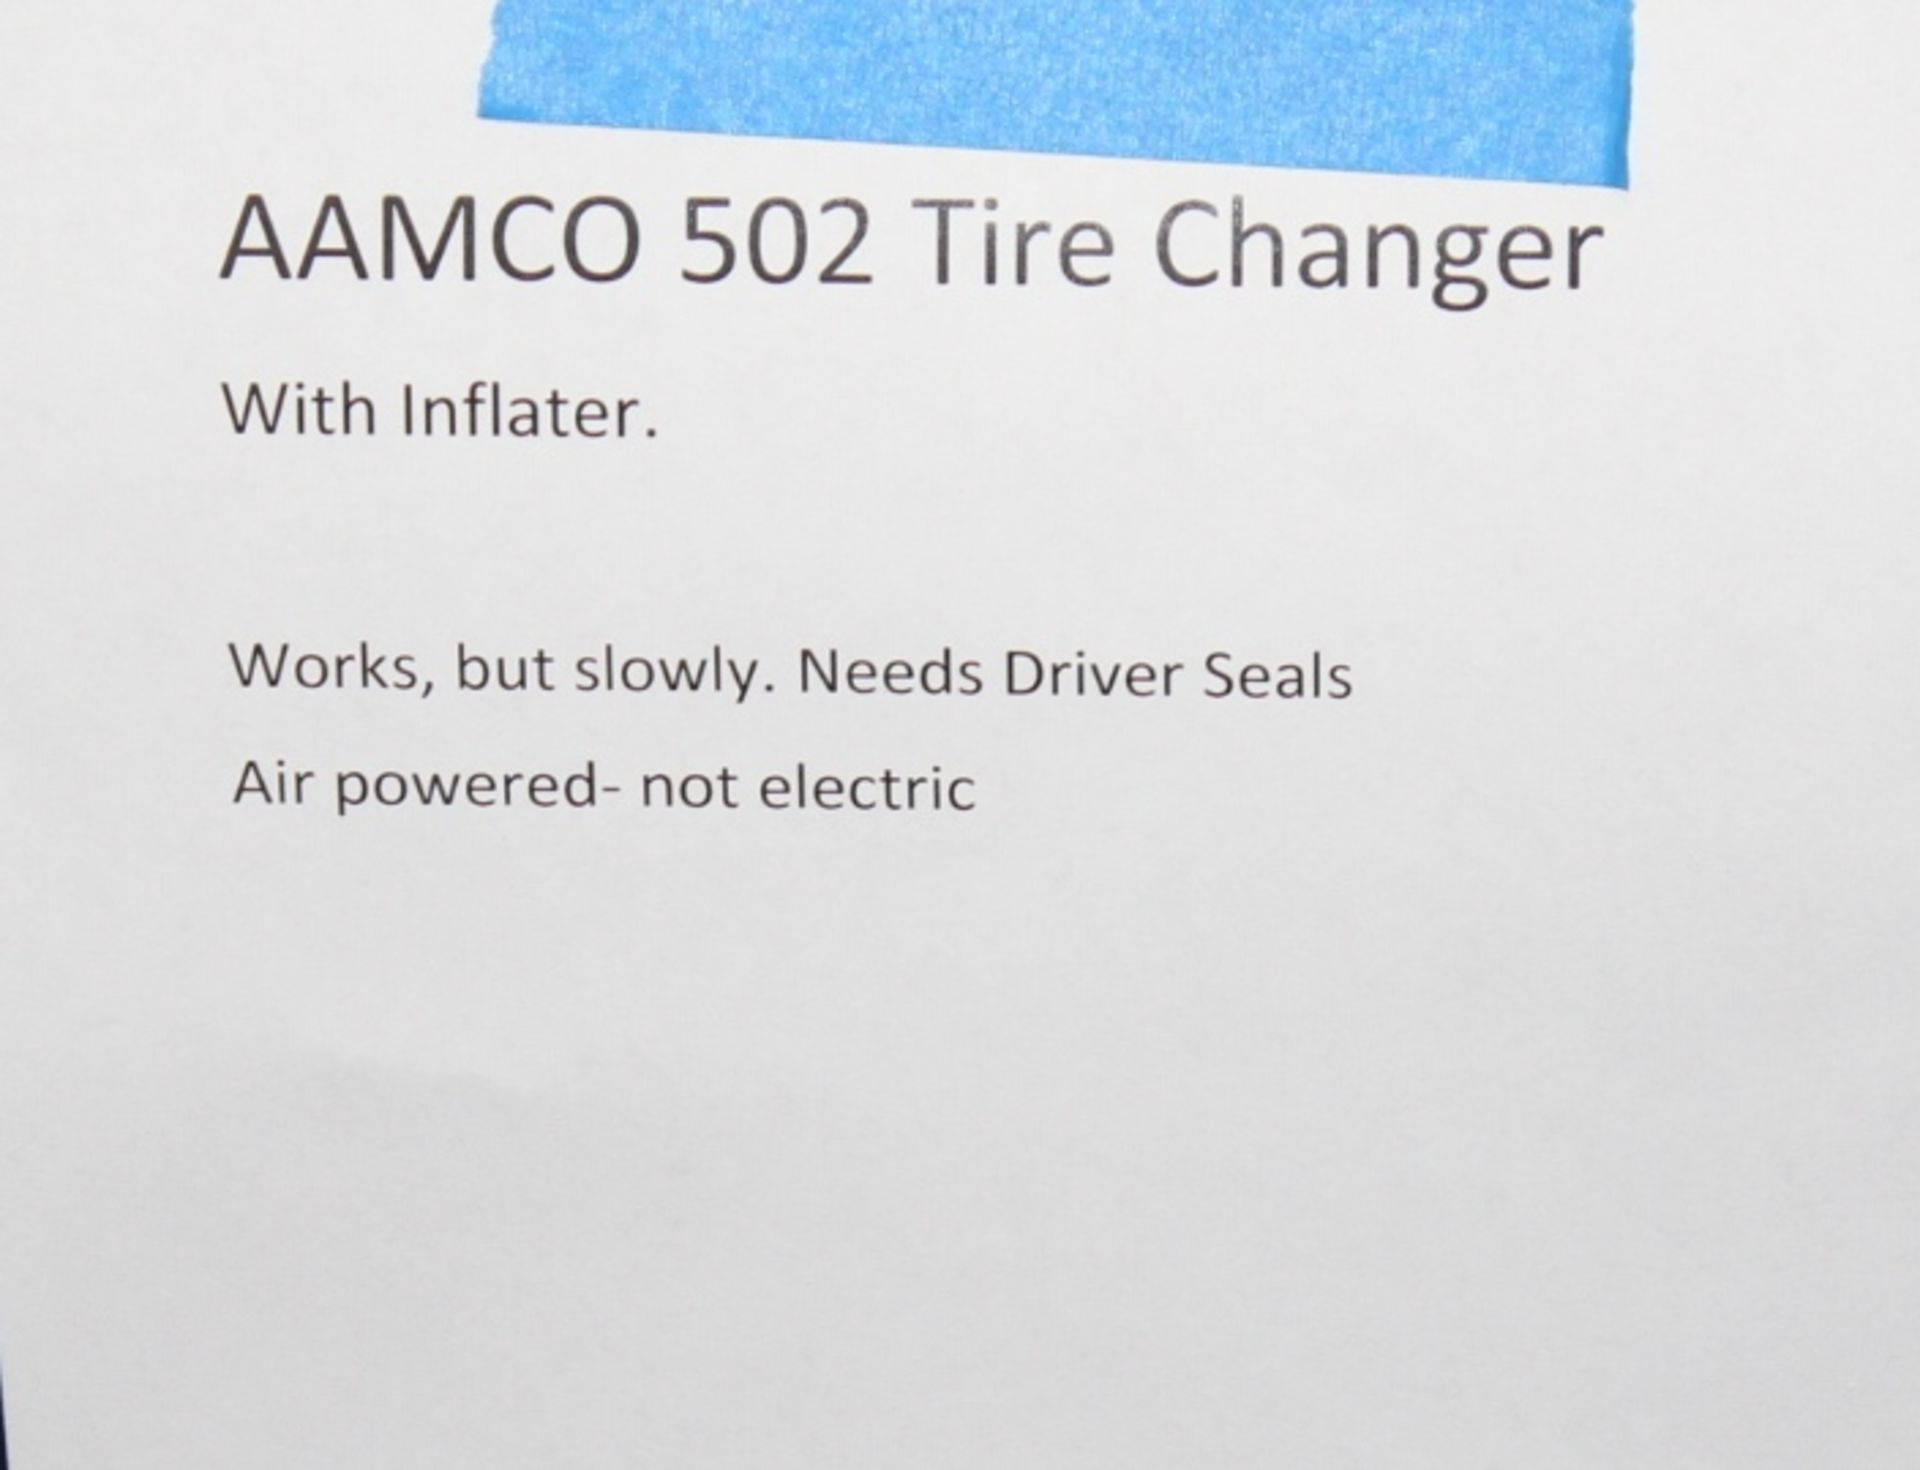 AAMCO 502 Tire Changer - Image 3 of 3